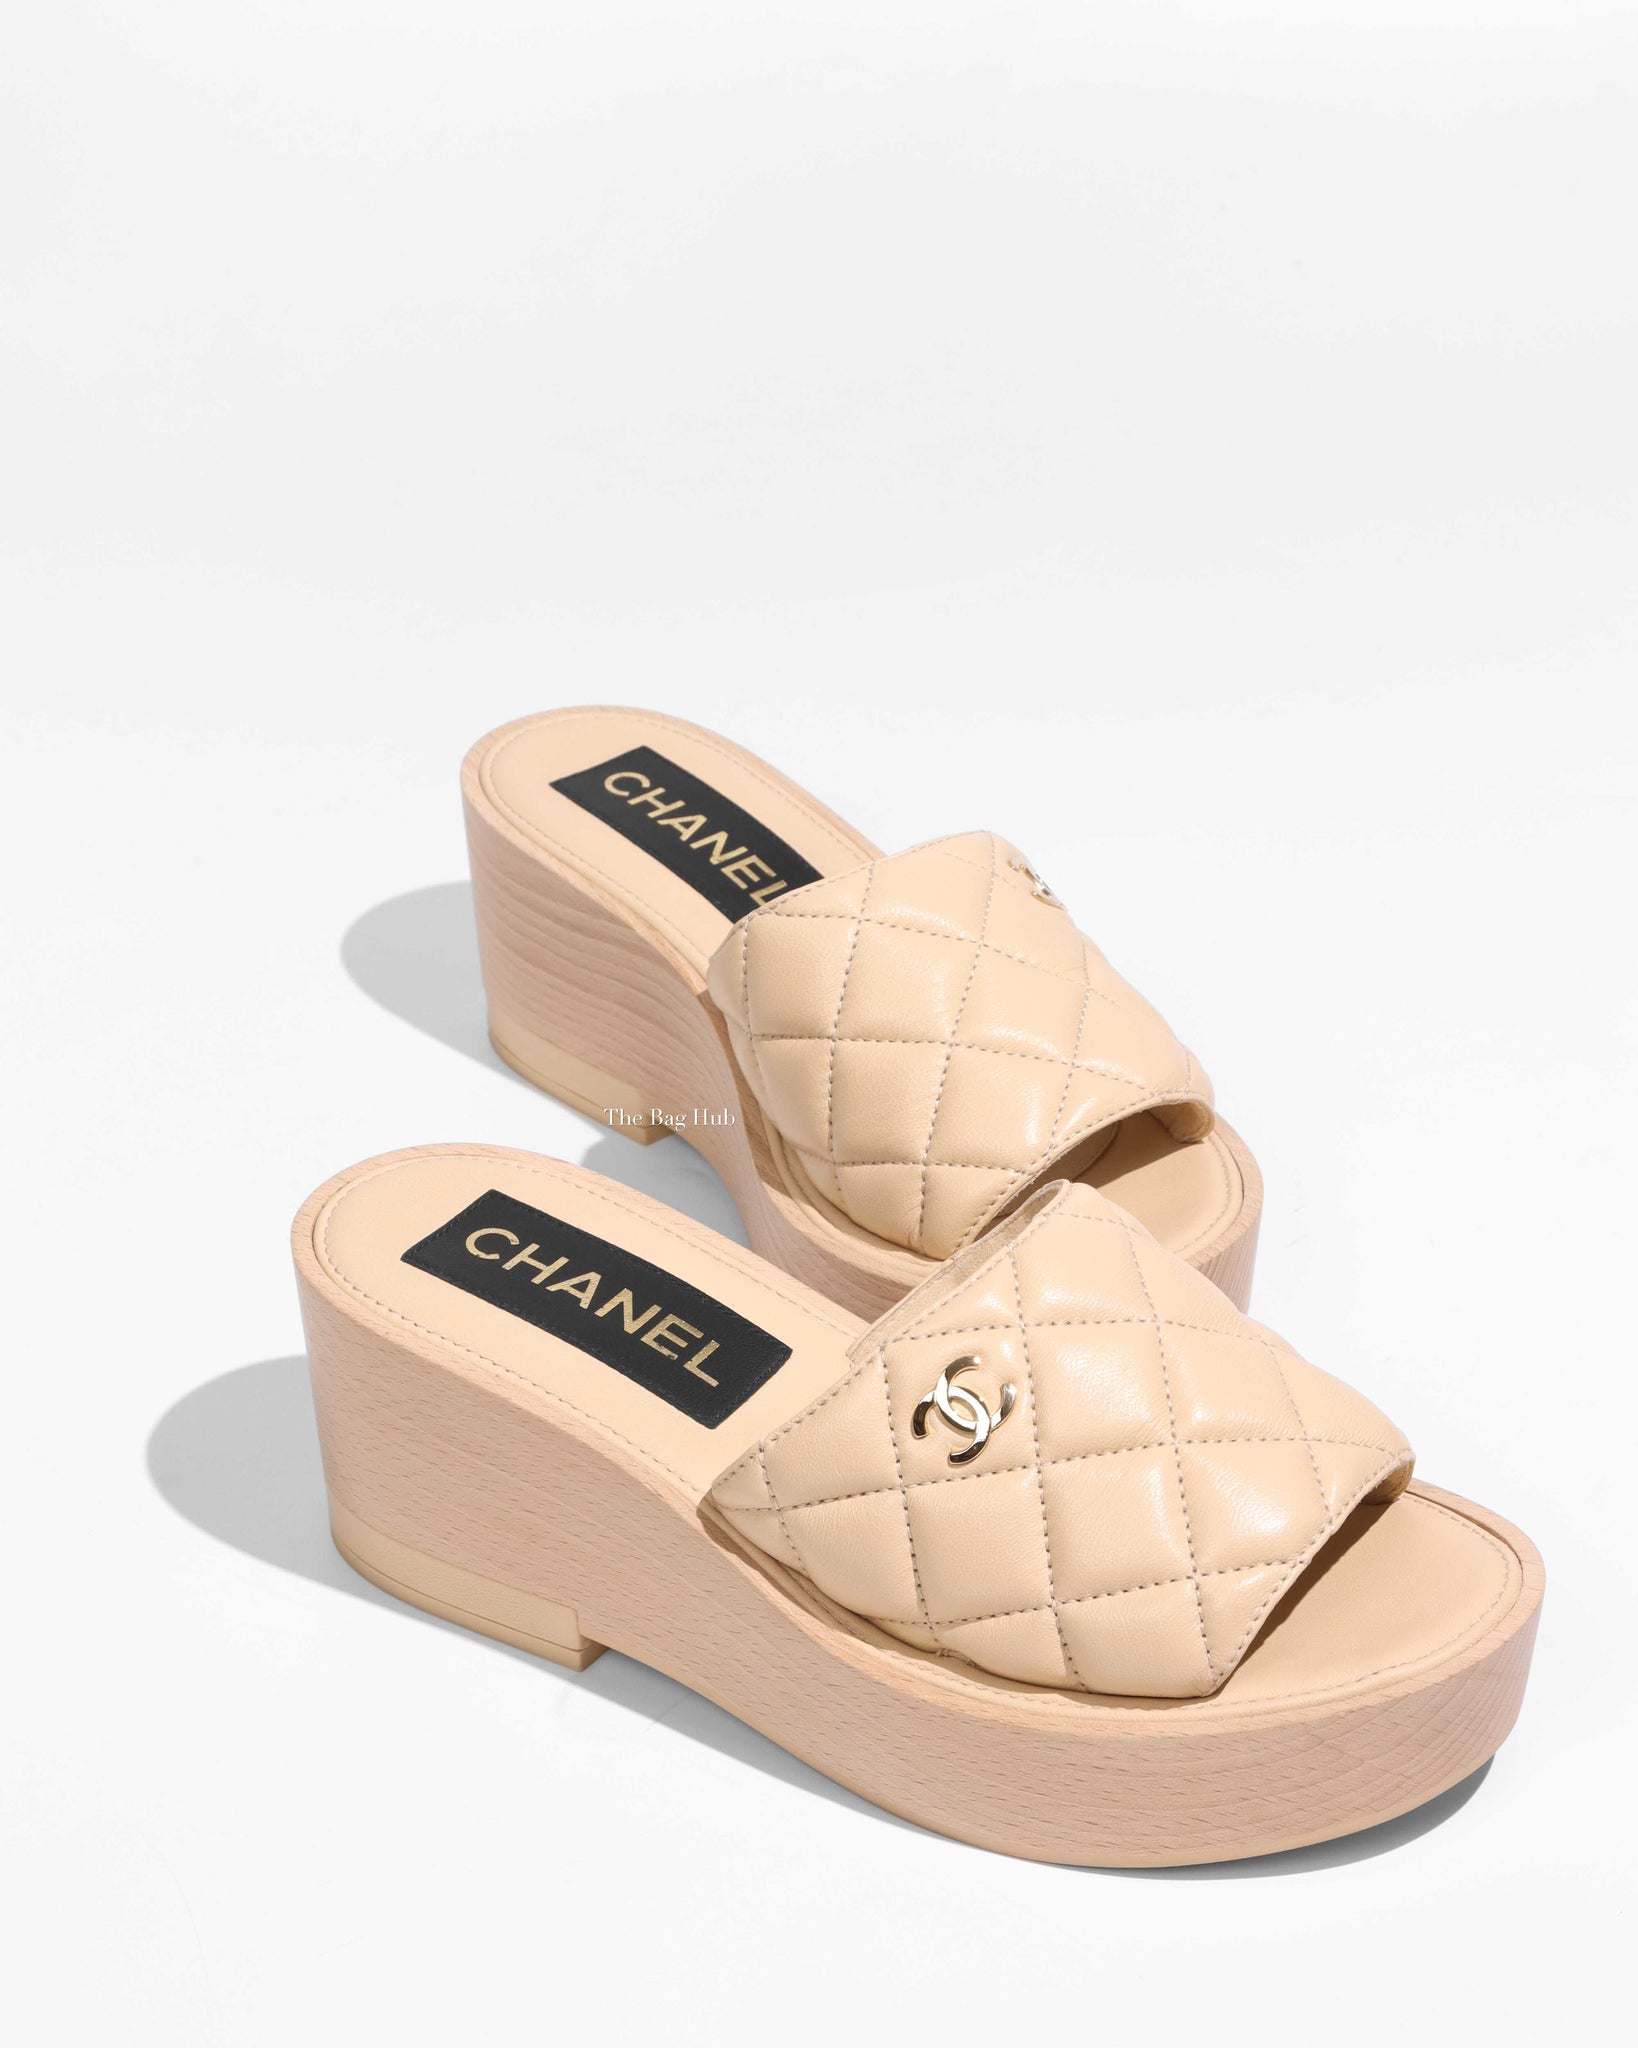 Chanel Beige Quilted Leather CC Wedge Sandals Size 37C